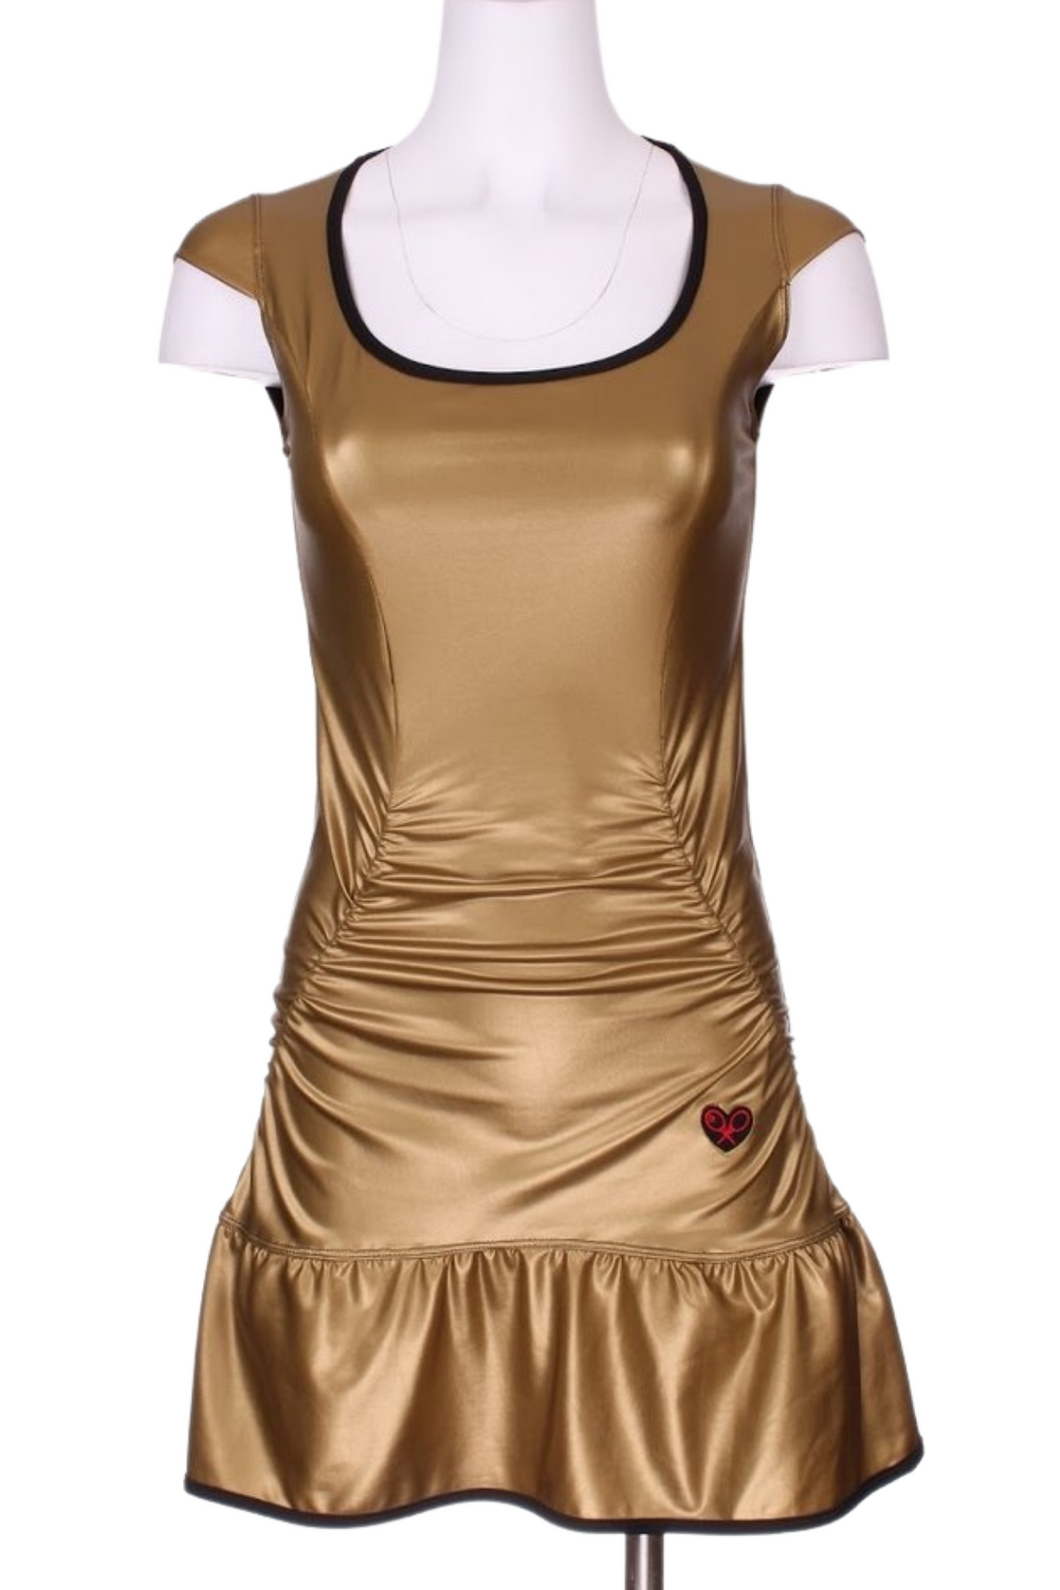 The Monroe Dress offers a little more coverage around the chest and the arms, but delicately shows your feminine curves. Our dress is fitted, and flares out at the skirt. It is perfect for tennis, running and golf, and of course, a trip to your after-court party with your friends. It was designed for confident women like you! 